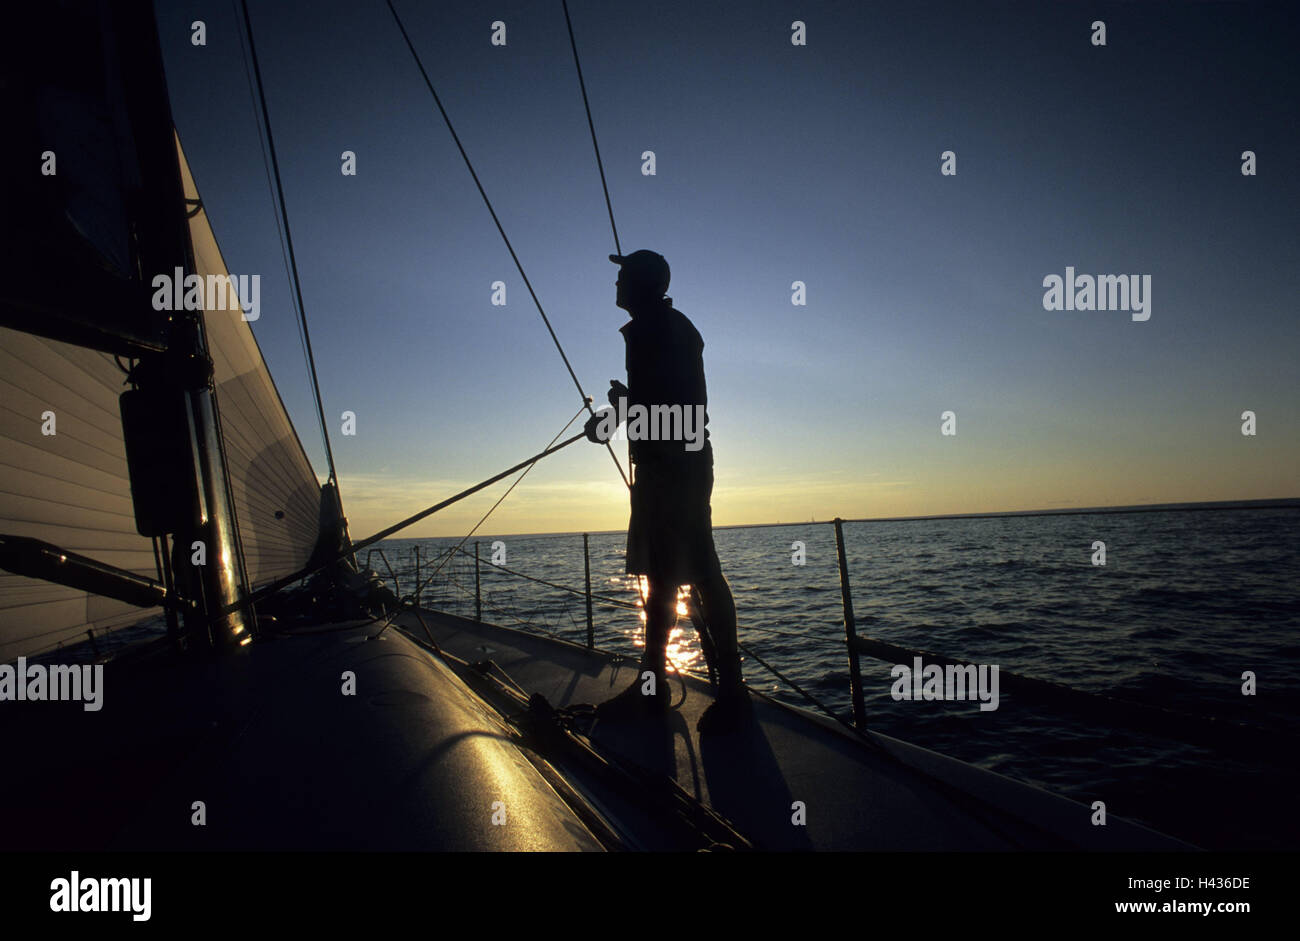 Sail yacht, man, deck, silhouette, evening mood, coxswain, sail, trim, wind, sailing ship, yacht, sailboats, boat, sailings, water sport, sport, sailing trip, regatta, hobby, navigation, maritime, sea, water, waves, horizon, distance, wind, width, vacation, loneliness, freedom, the Baltic Sea, only, mood, evening, cloudless, sundown, romantically, yachtsman, trimmer, Stock Photo